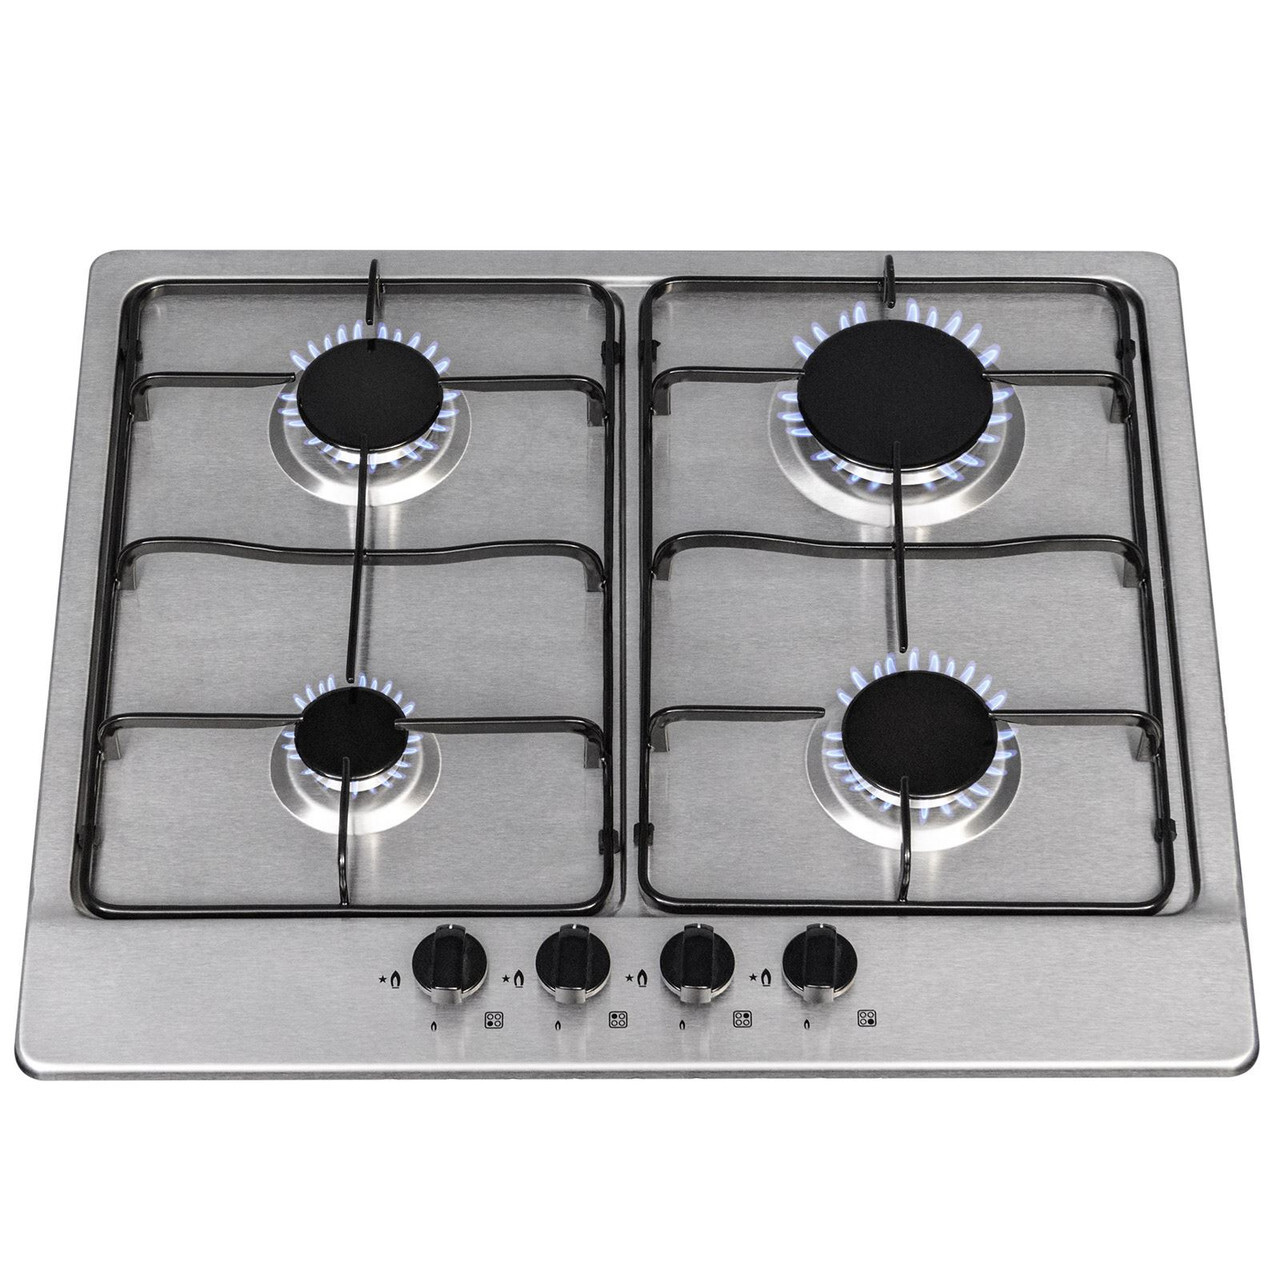 SIA SSG602SS 60cm Stainless Steel 4 Burner Gas Hob with Enamel Pan Stands Brand New